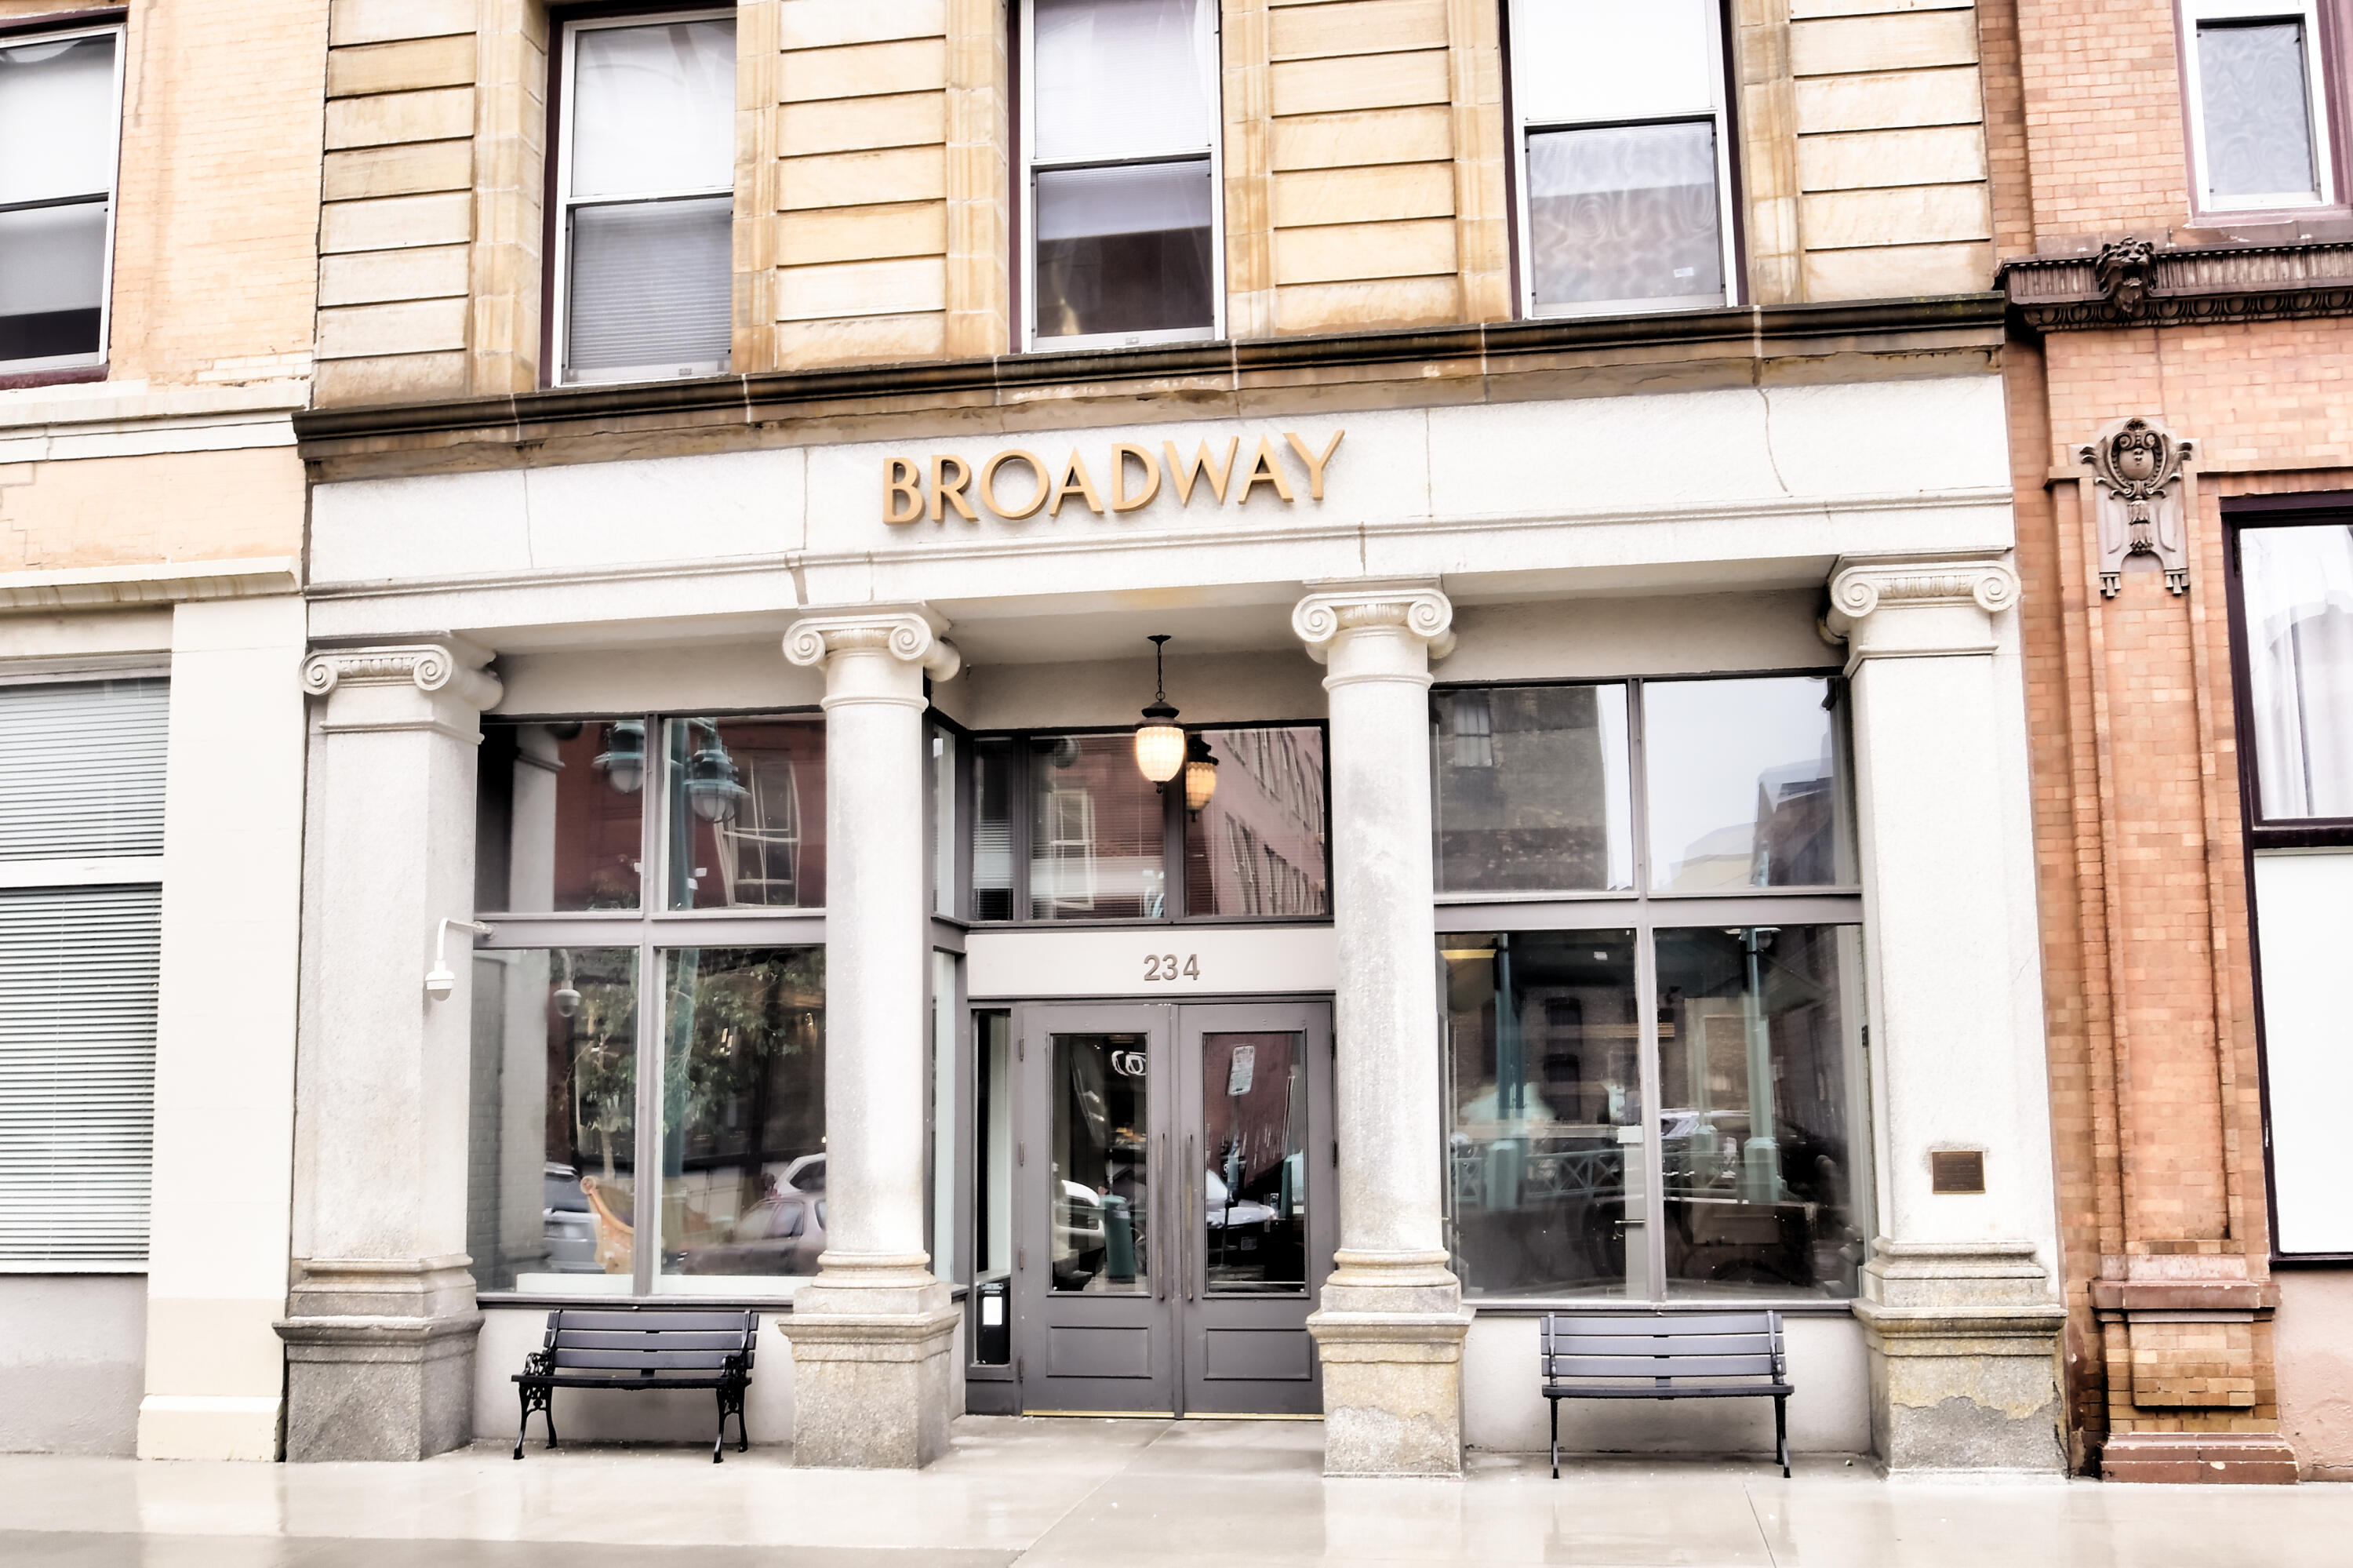 The Historic Broadway Building